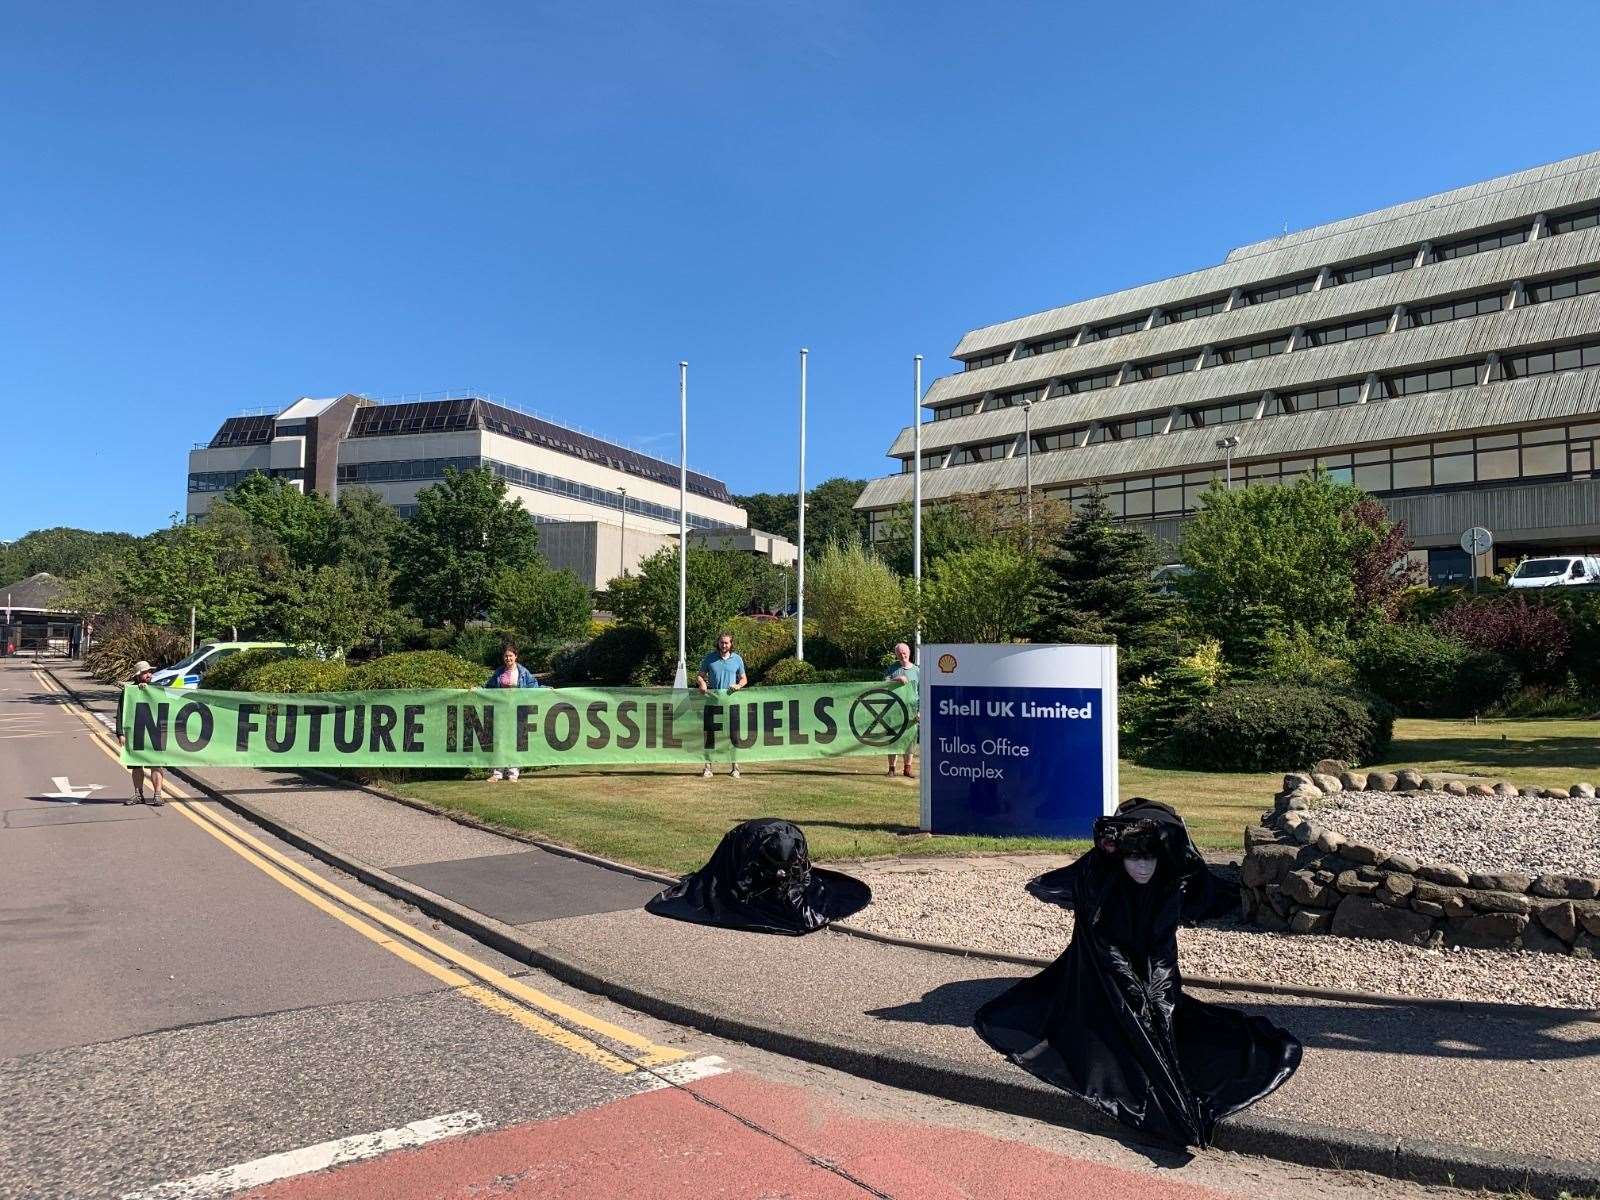 The Oil Slicks at Shell’s Aberdeen headquarters to highlight the firm’s lack of responsibility.